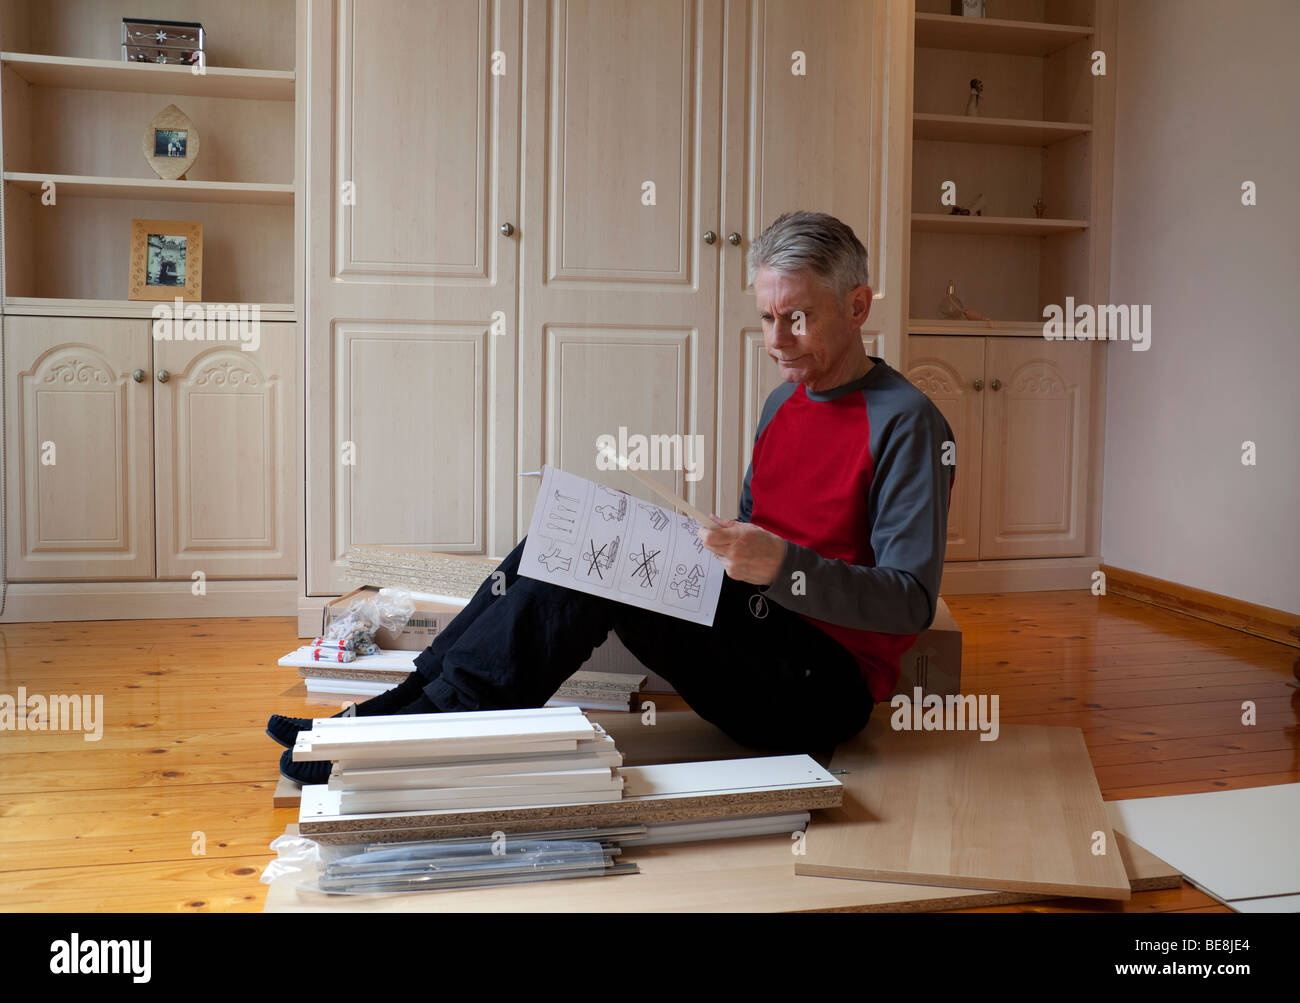 Older man with grey hair sitting looking perplexed reading instruction leaflet surrounded by flat pack DIY furniture Stock Photo